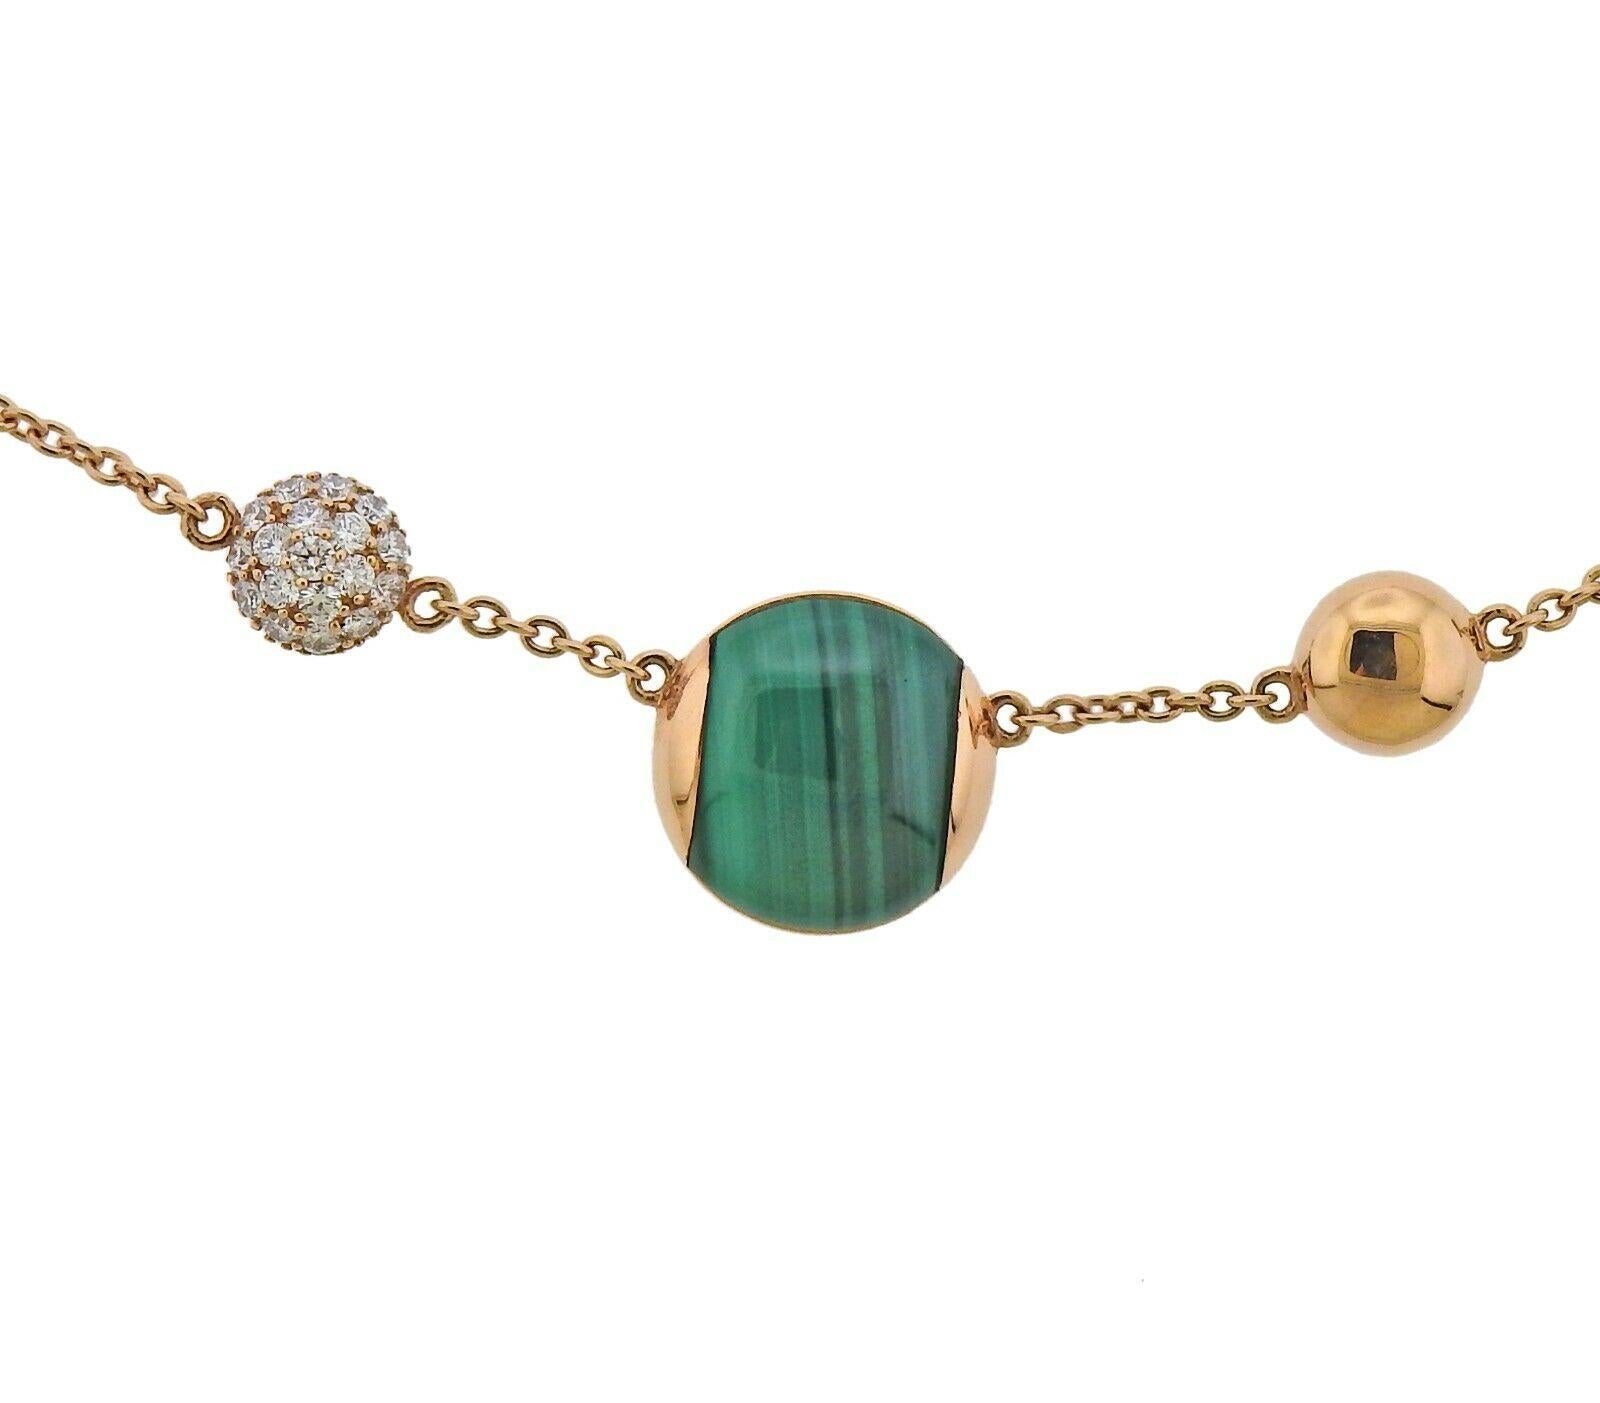 New Roberto Coin necklace in 18k rose gold, with malachite and approx. 0.22ctw in G/VS diamonds. Retail $4950, with box/papers. Necklace is 18